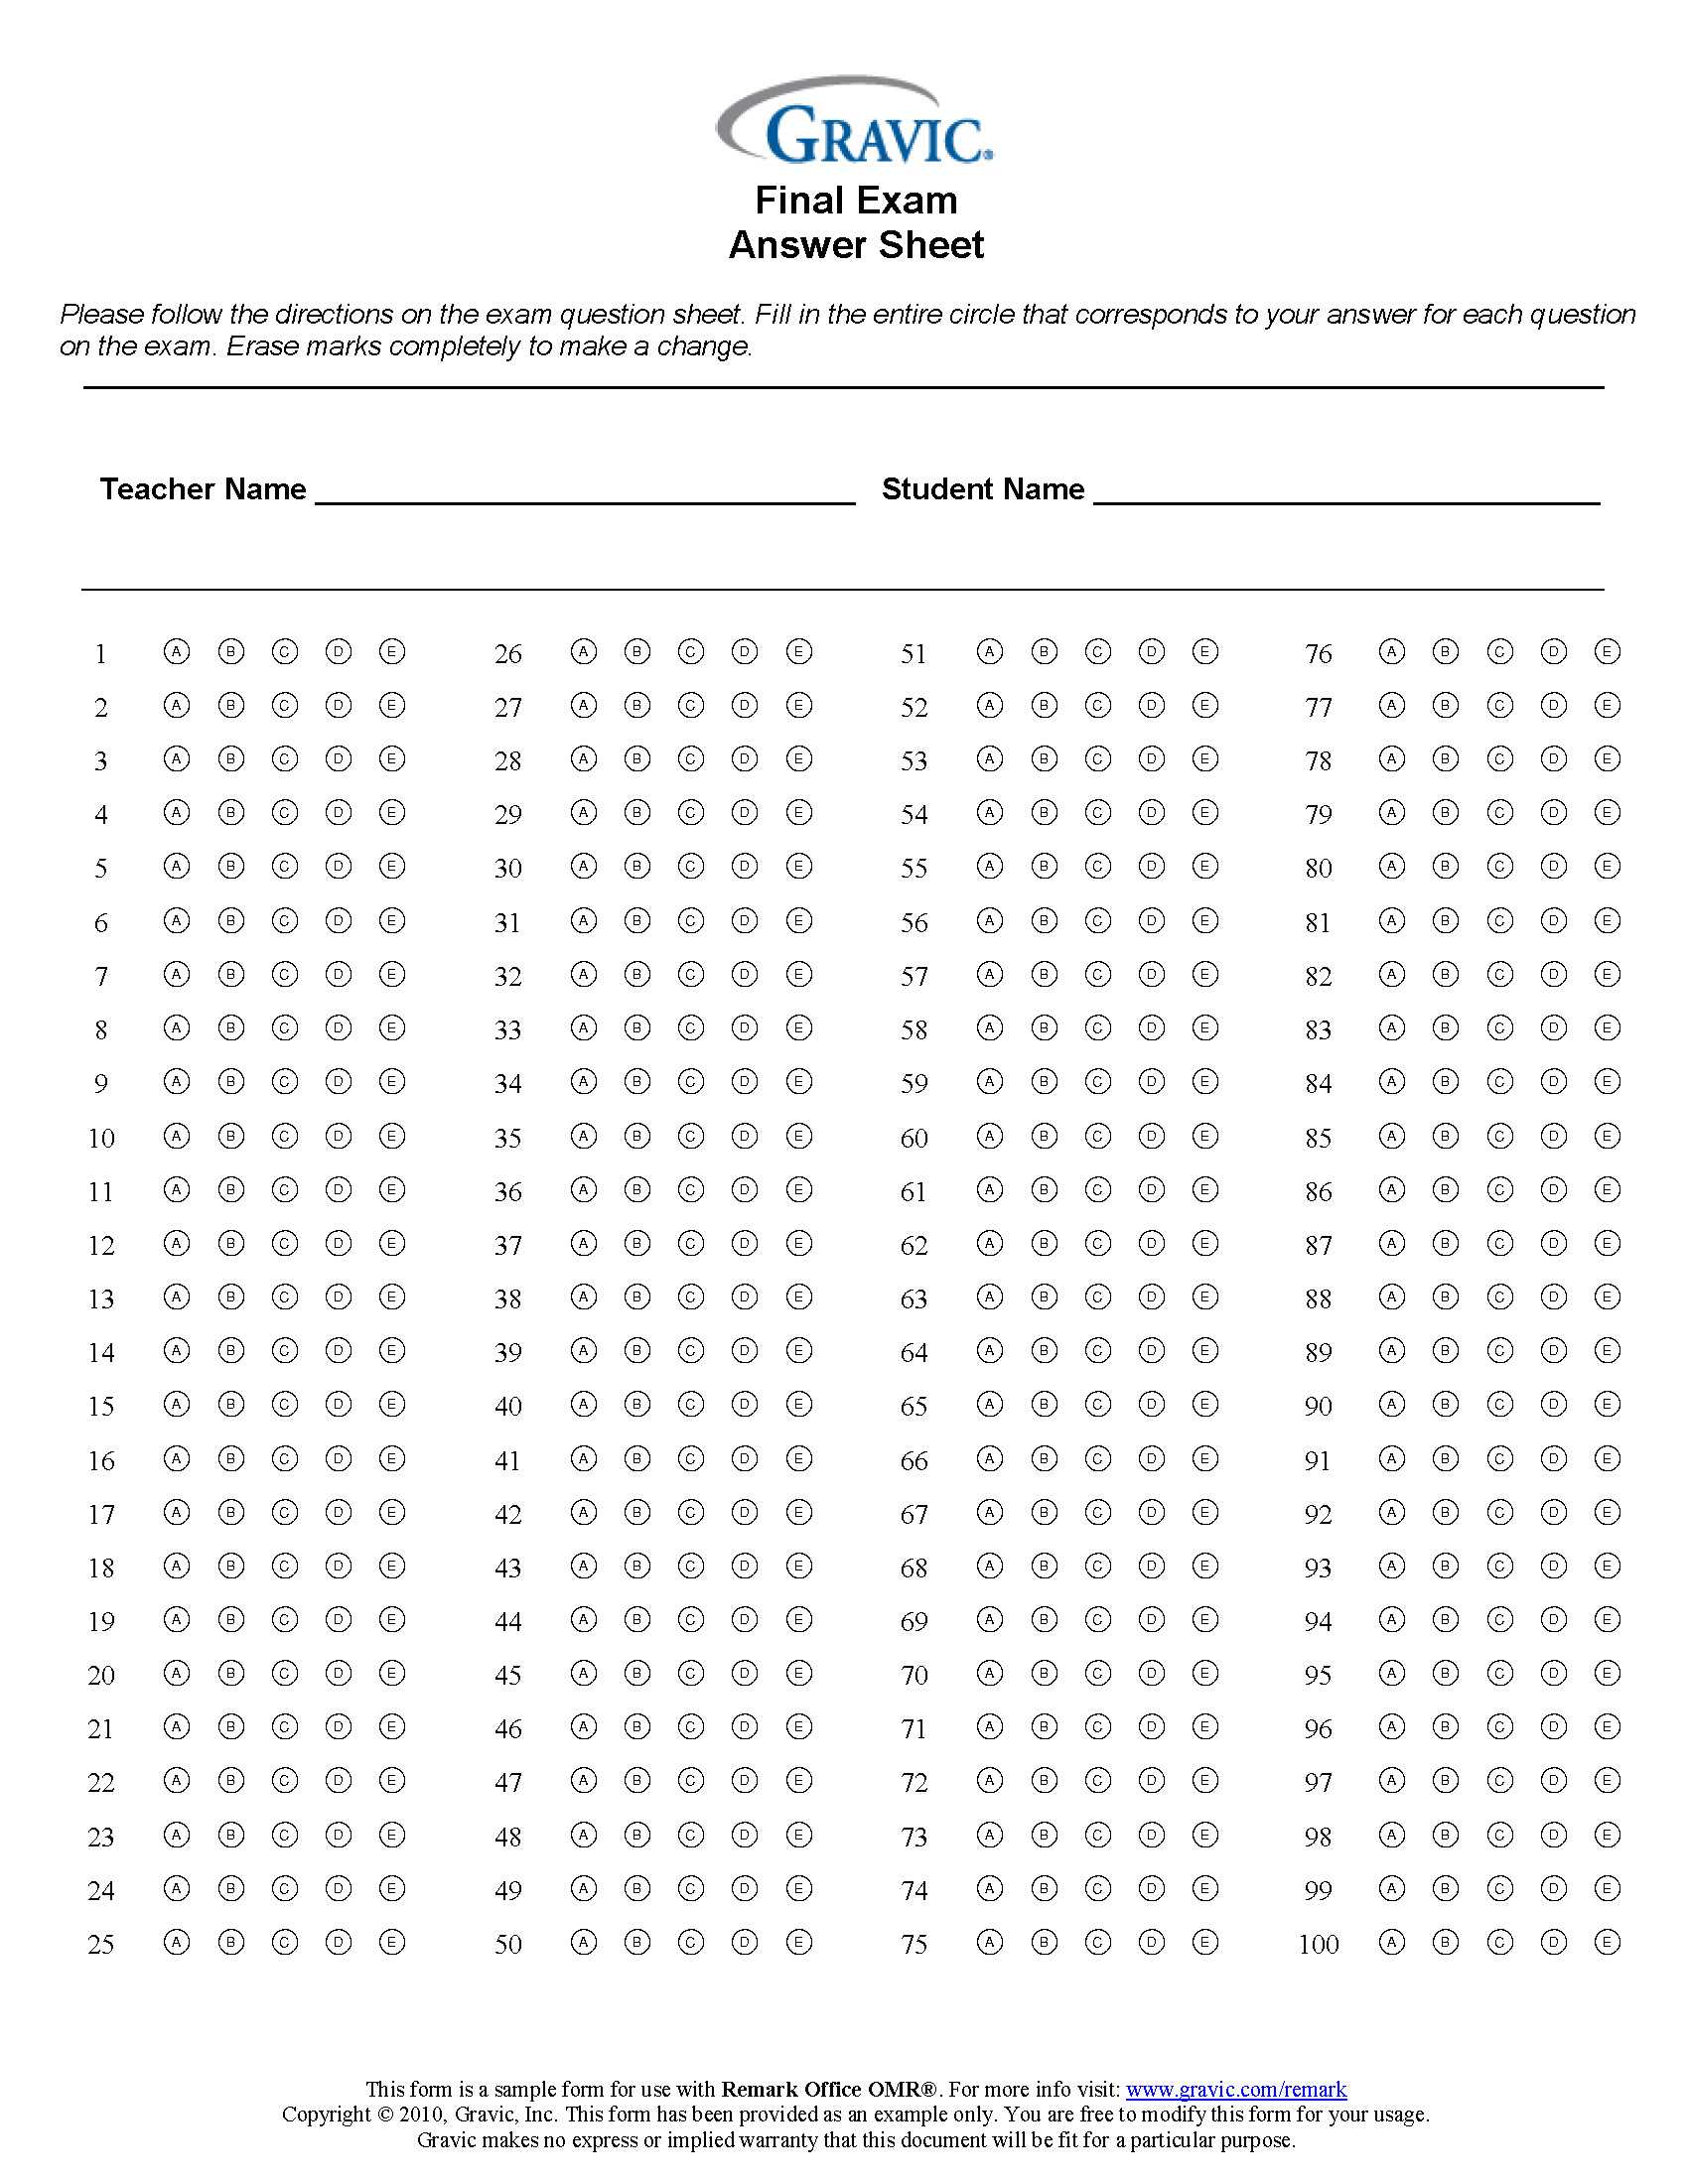 Final Exam 100 Question Test Answer Sheet · Remark Software Pertaining To Blank Answer Sheet Template 1 100